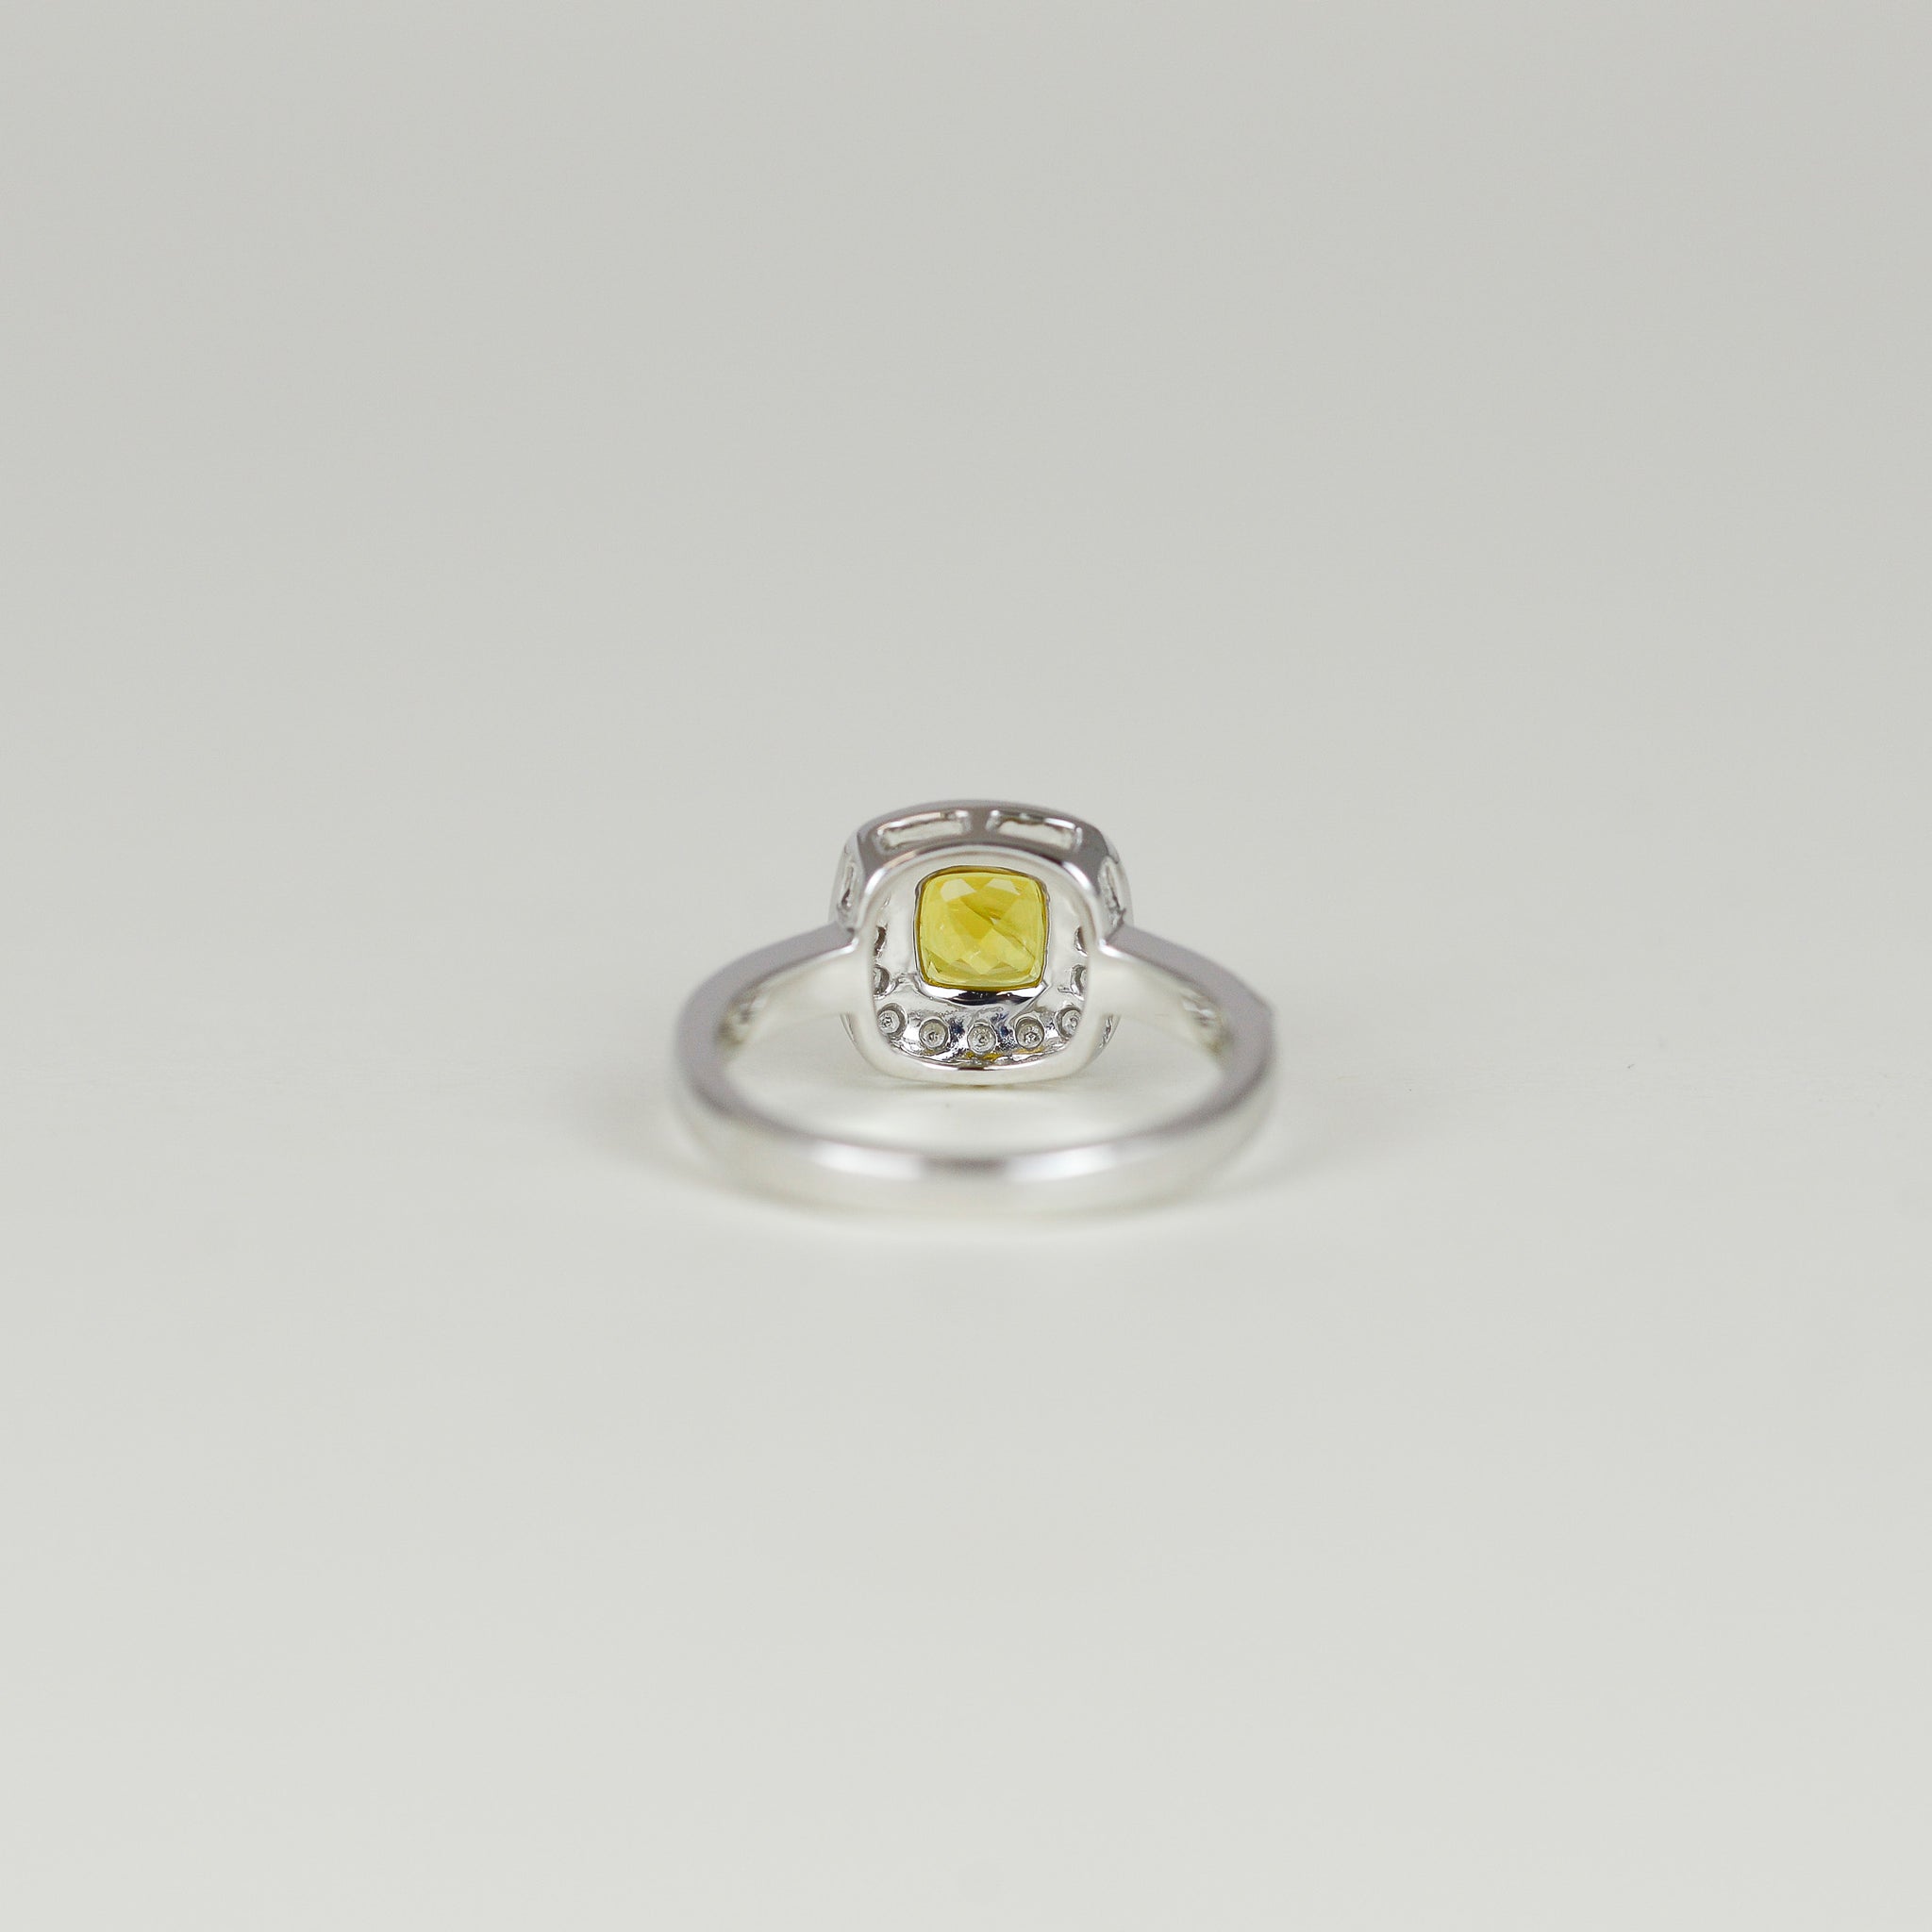 18ct White Gold 1.23ct Cushion Cut Yellow Sapphire and Diamond Cluster Ring